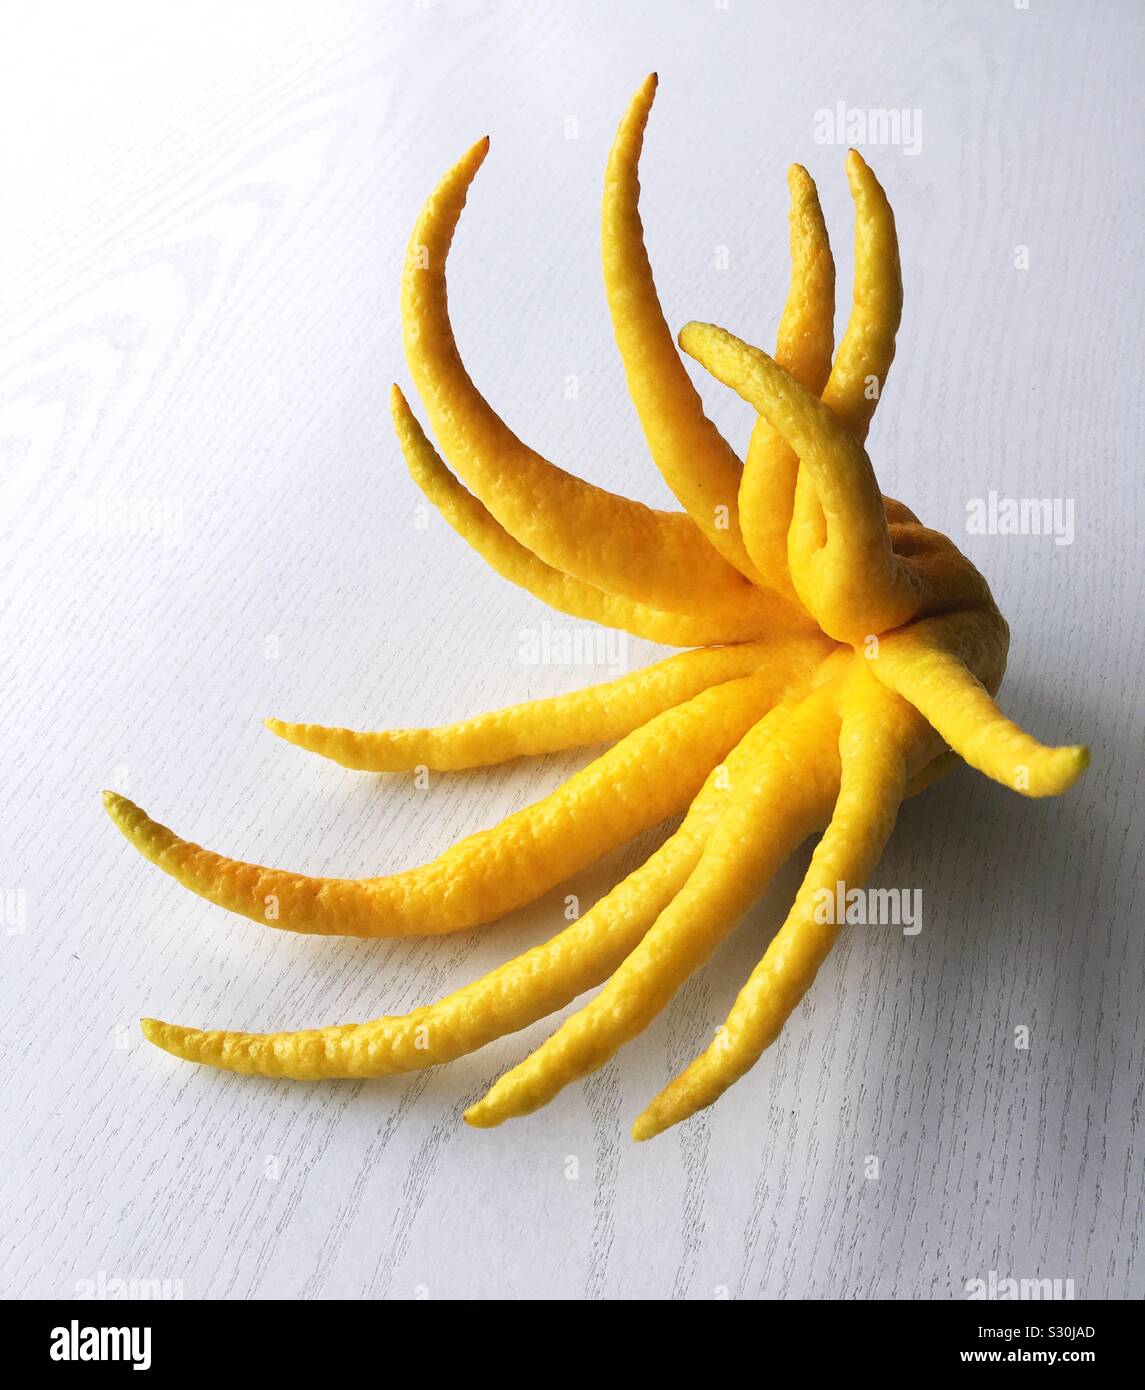 Buddha’s Hand fruit on a white table. Stock Photo